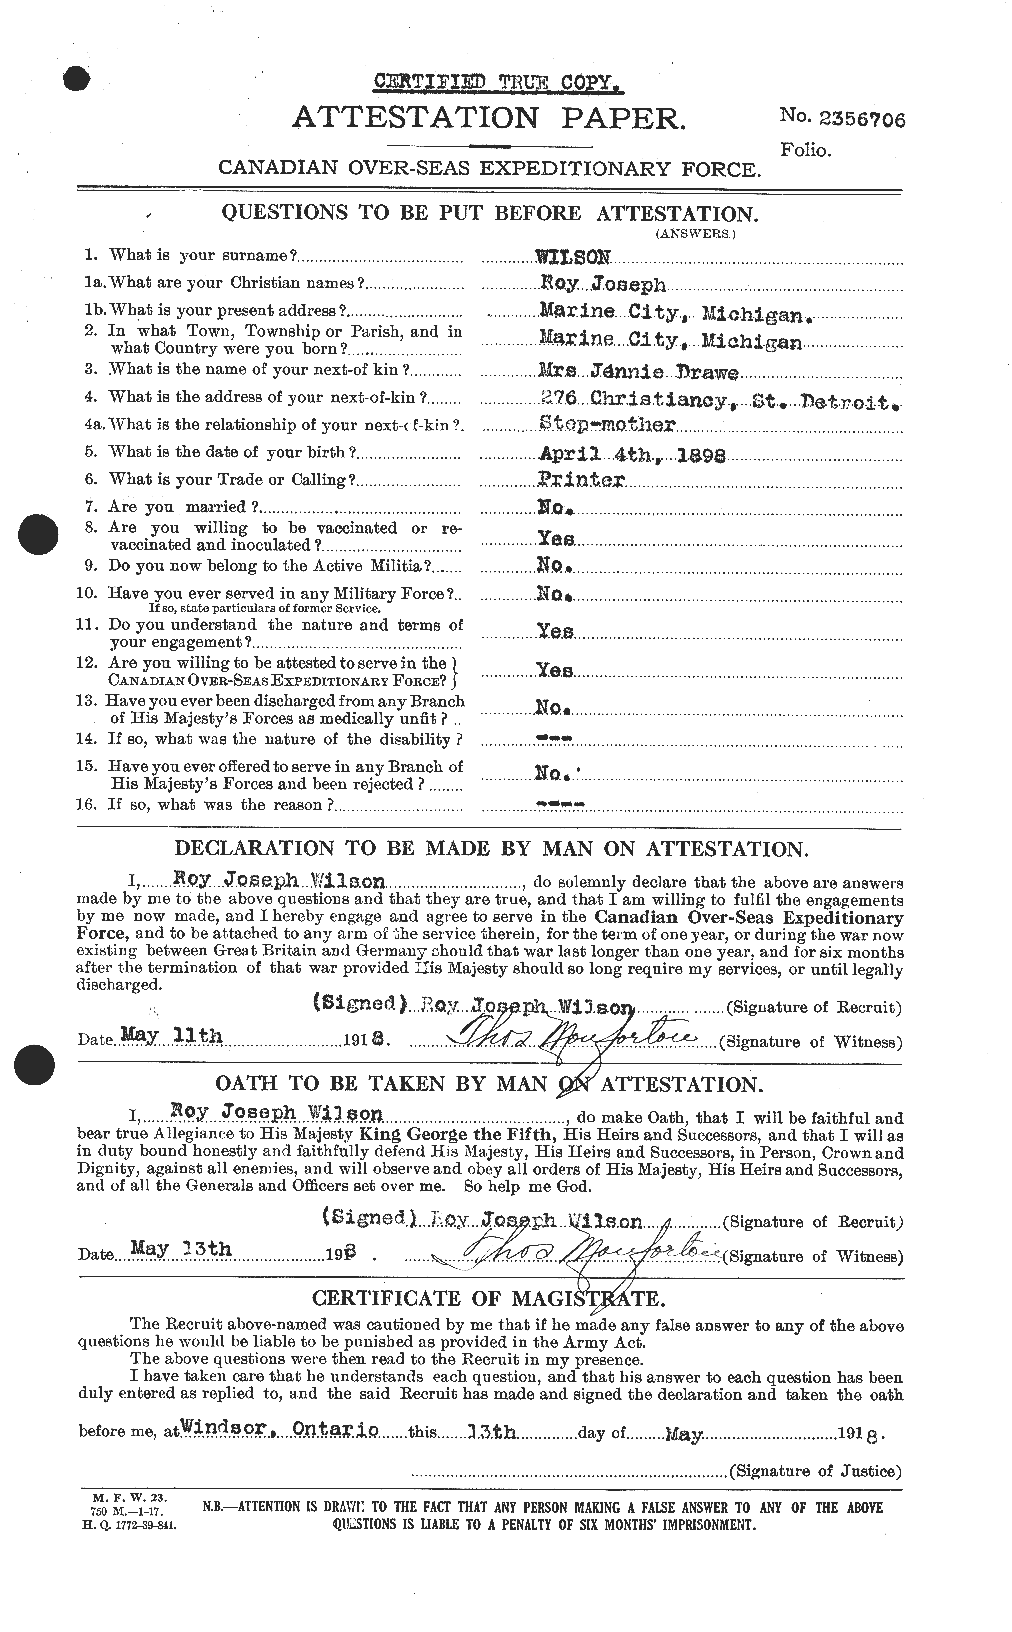 Personnel Records of the First World War - CEF 681062a